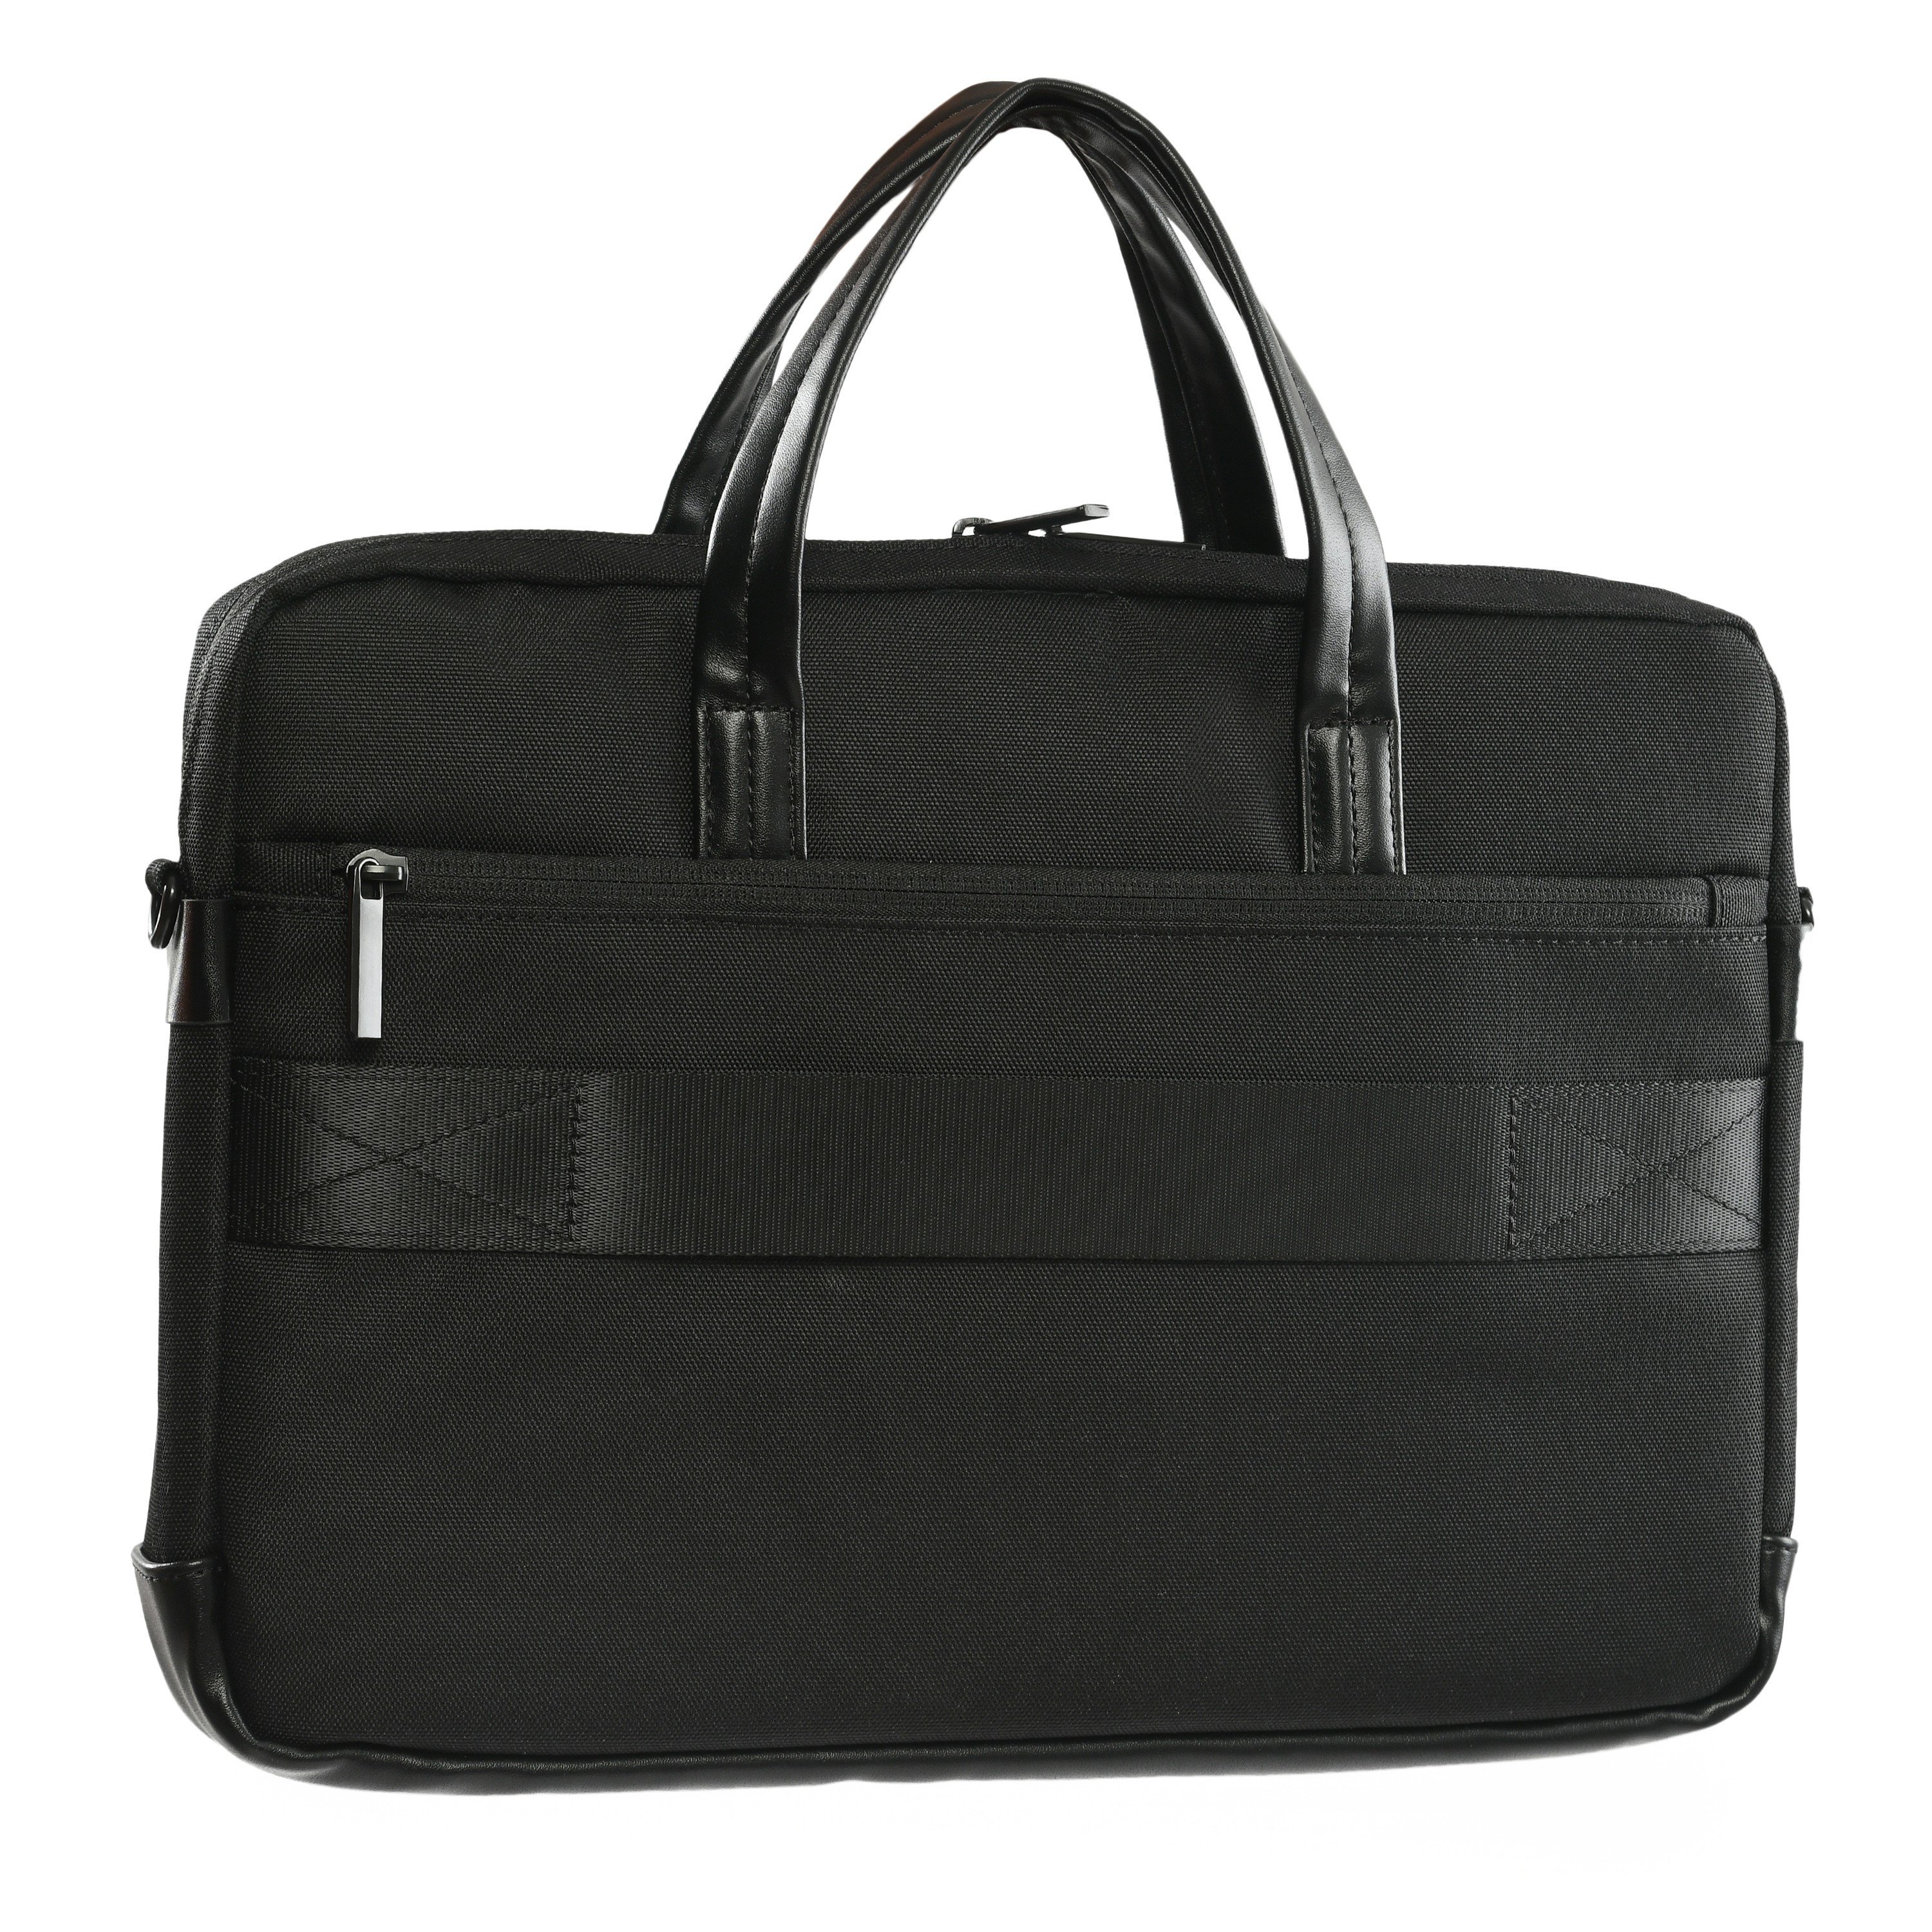 PRINGLE MATEO DUFFEL BAG MENS - Destinations by Frasers